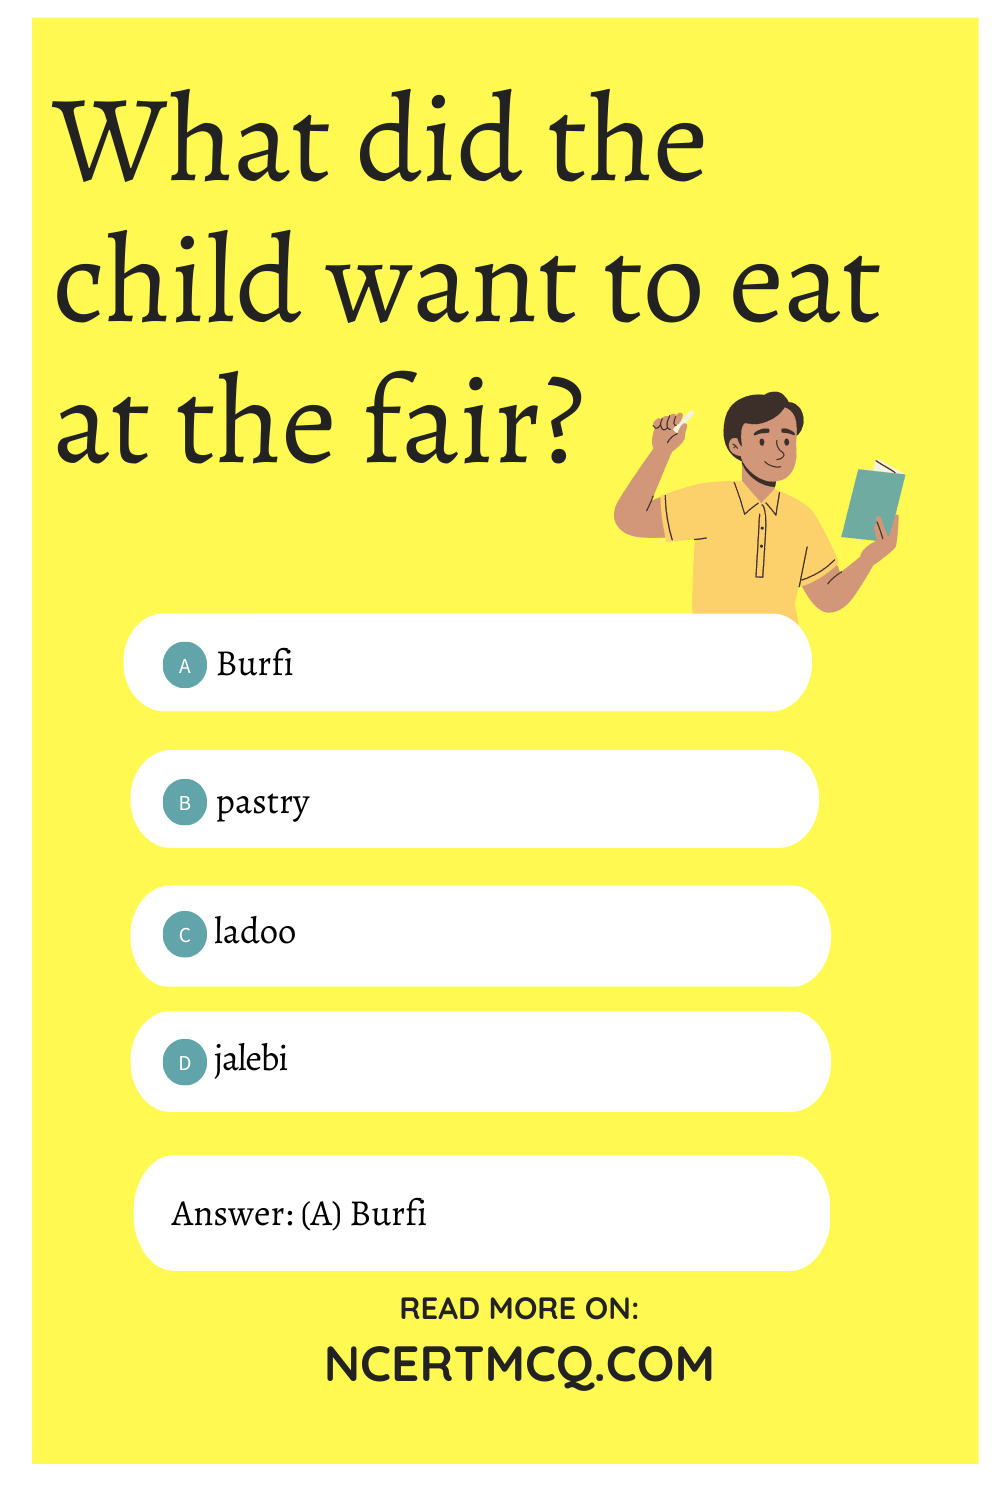 What did the child want to eat at the fair?